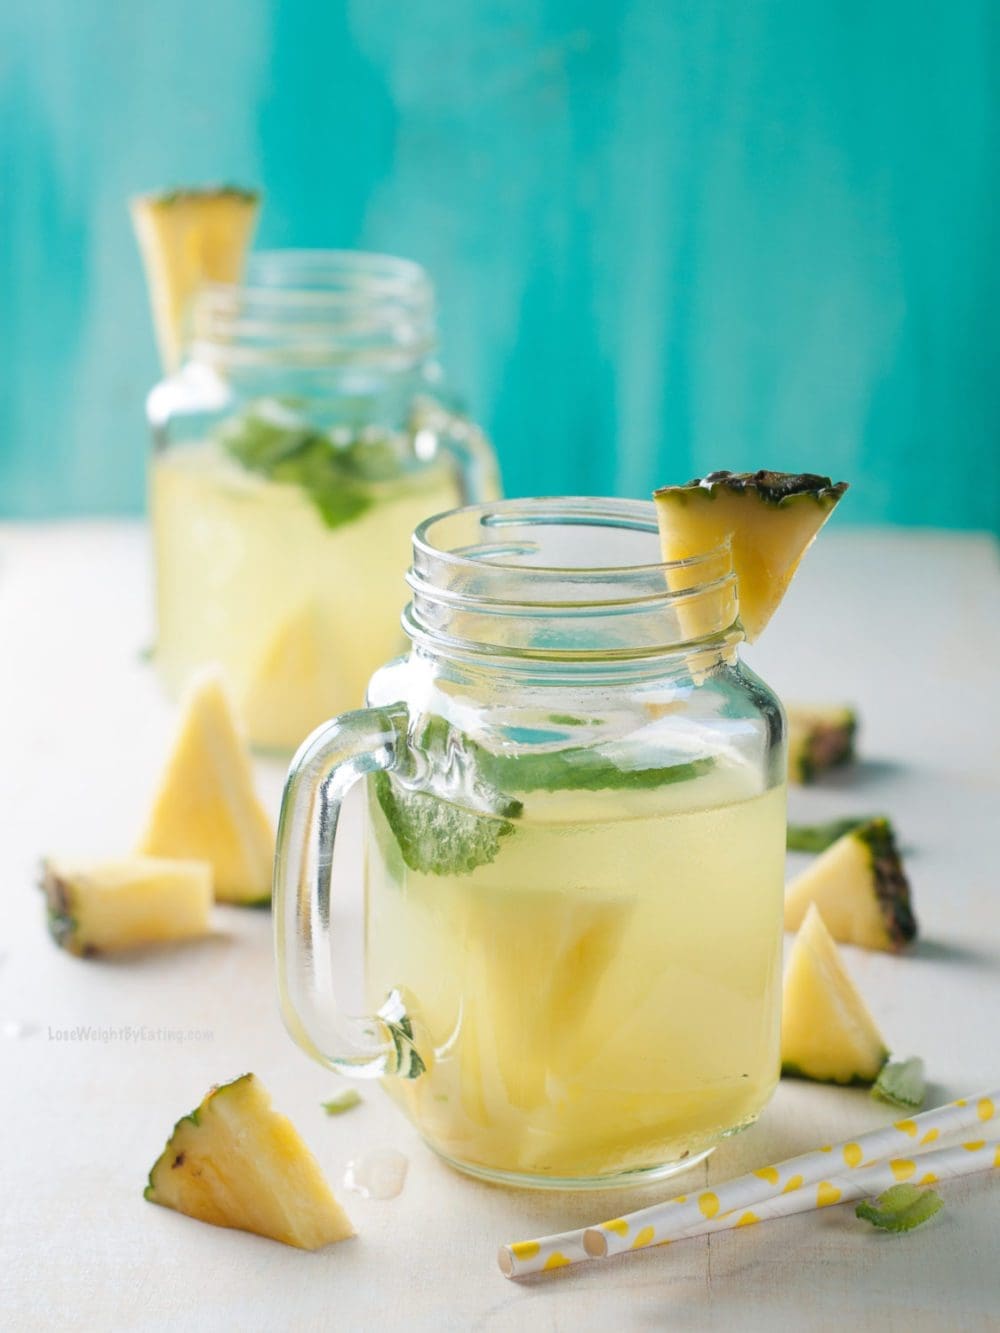 Pineapple Water for Weight Loss